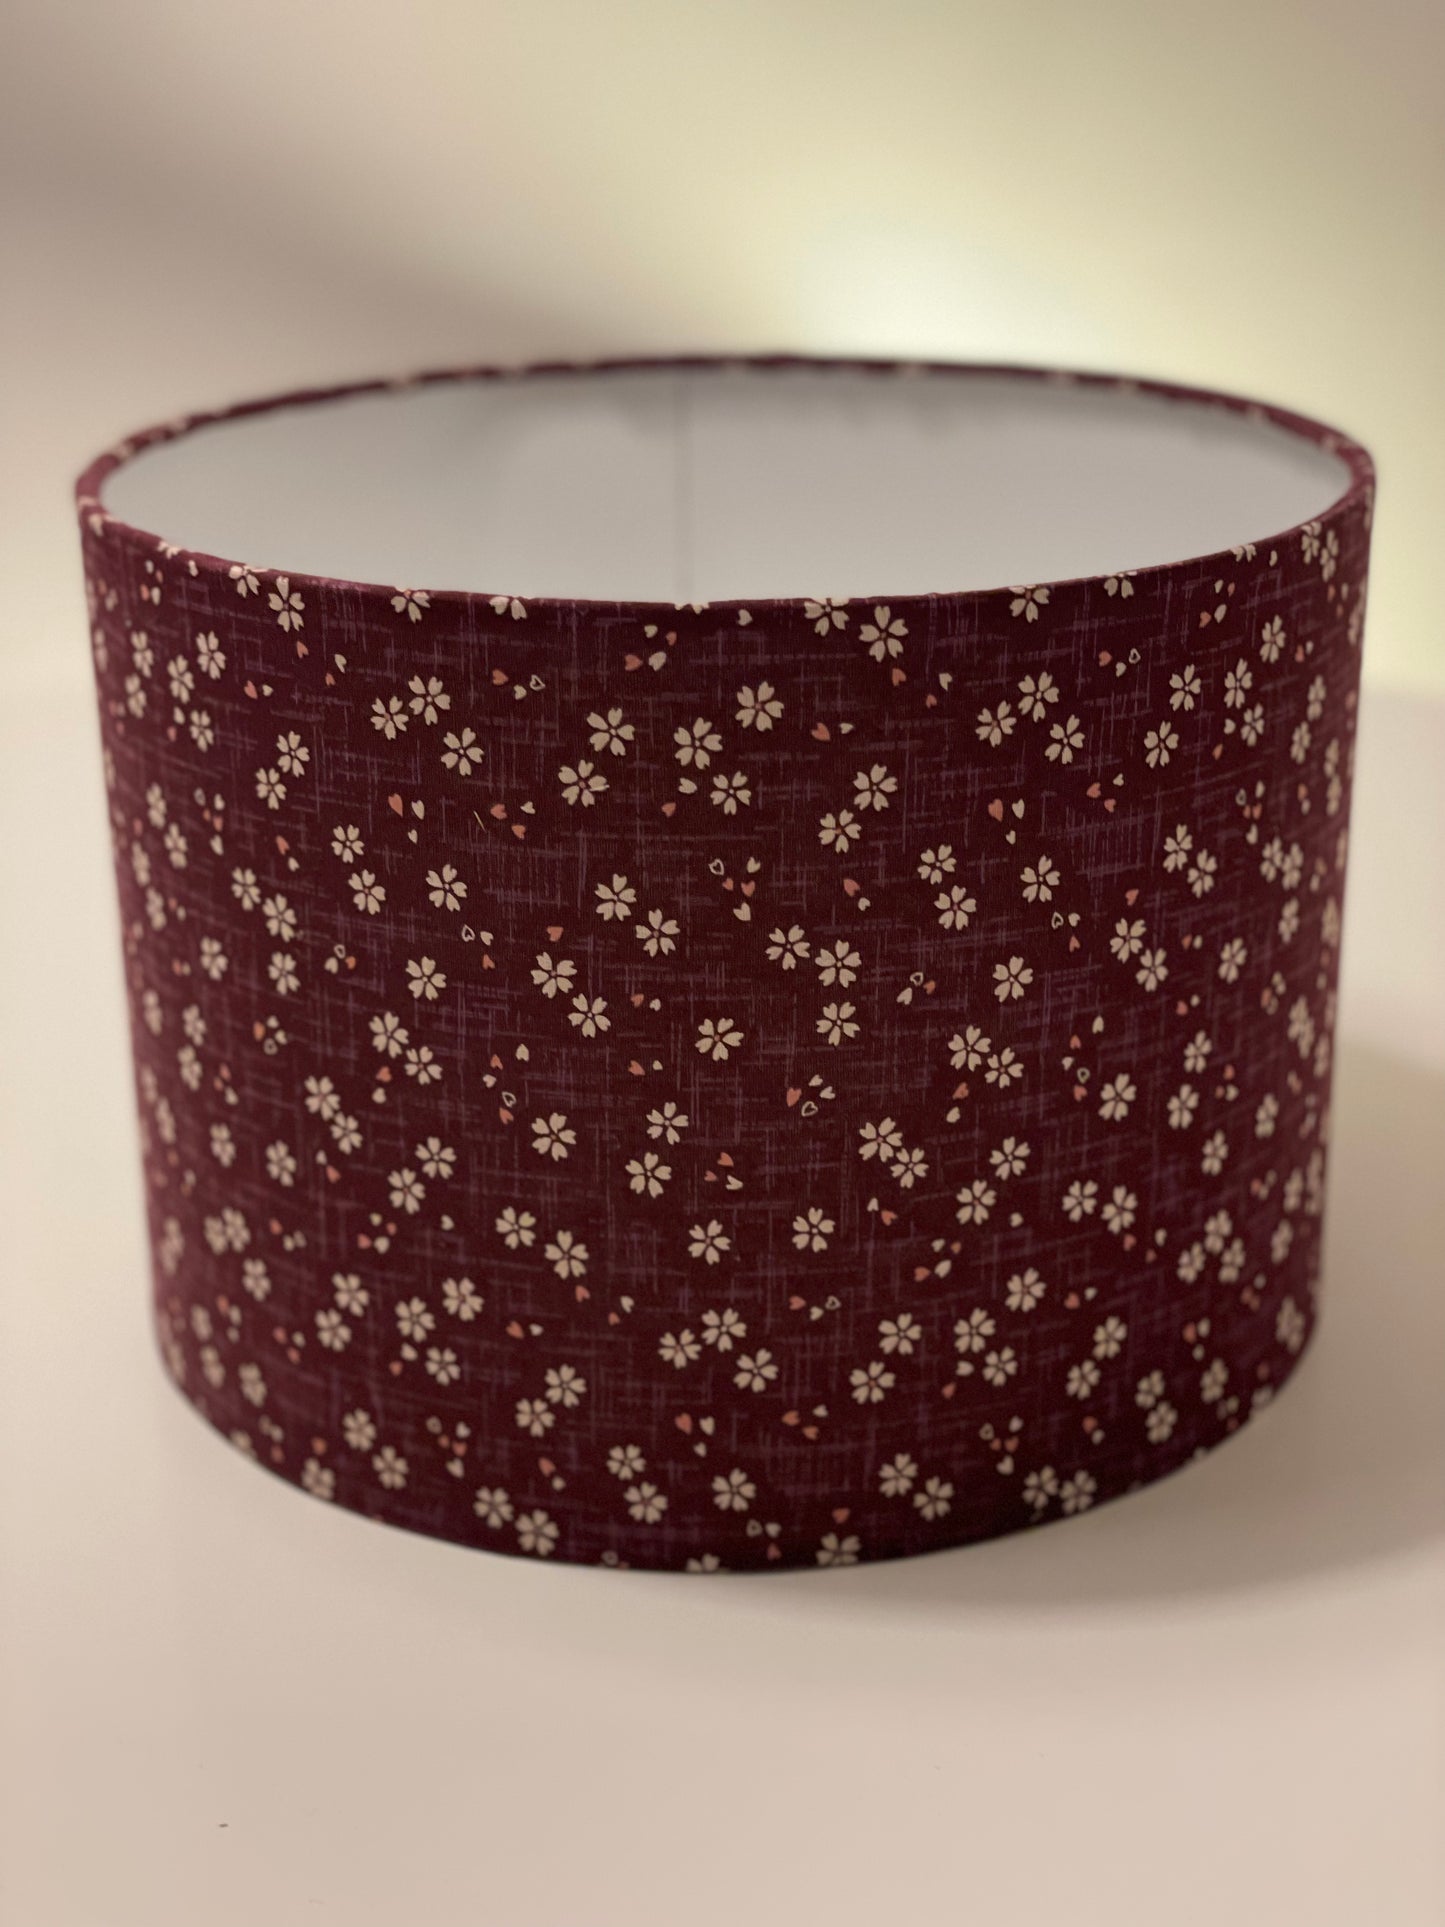 10 inch Drum Lampshade. Deep Plum with Tiny Cherry Blossom Motif. Japanese Cotton Fabric.